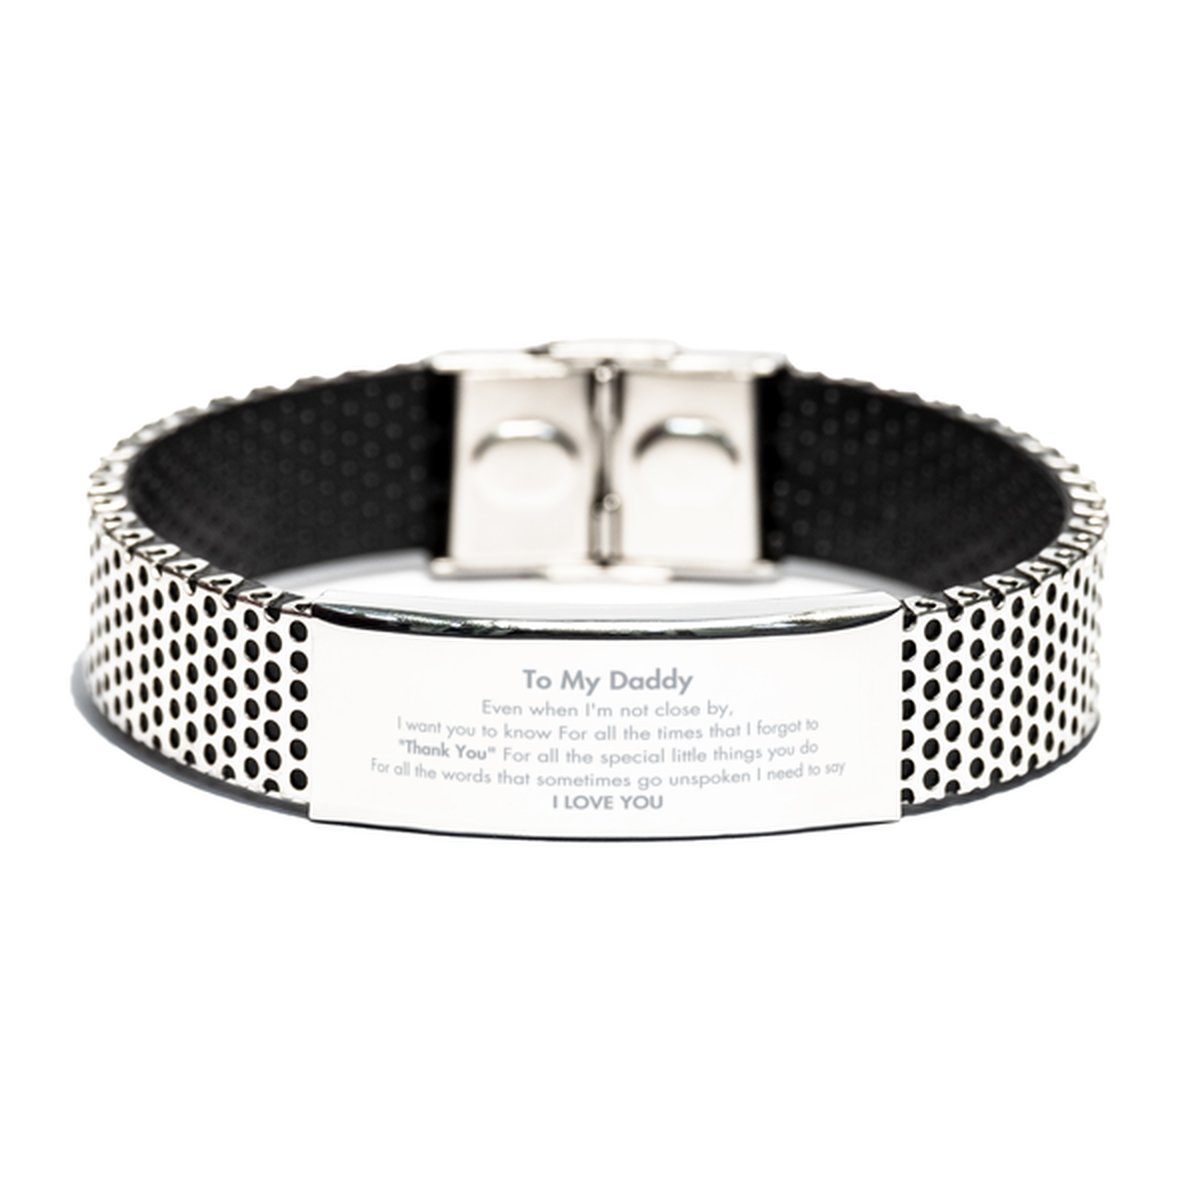 Thank You Gifts for Daddy, Keepsake Stainless Steel Bracelet Gifts for Daddy Birthday Mother's day Father's Day Daddy For all the words That sometimes go unspoken I need to say I LOVE YOU